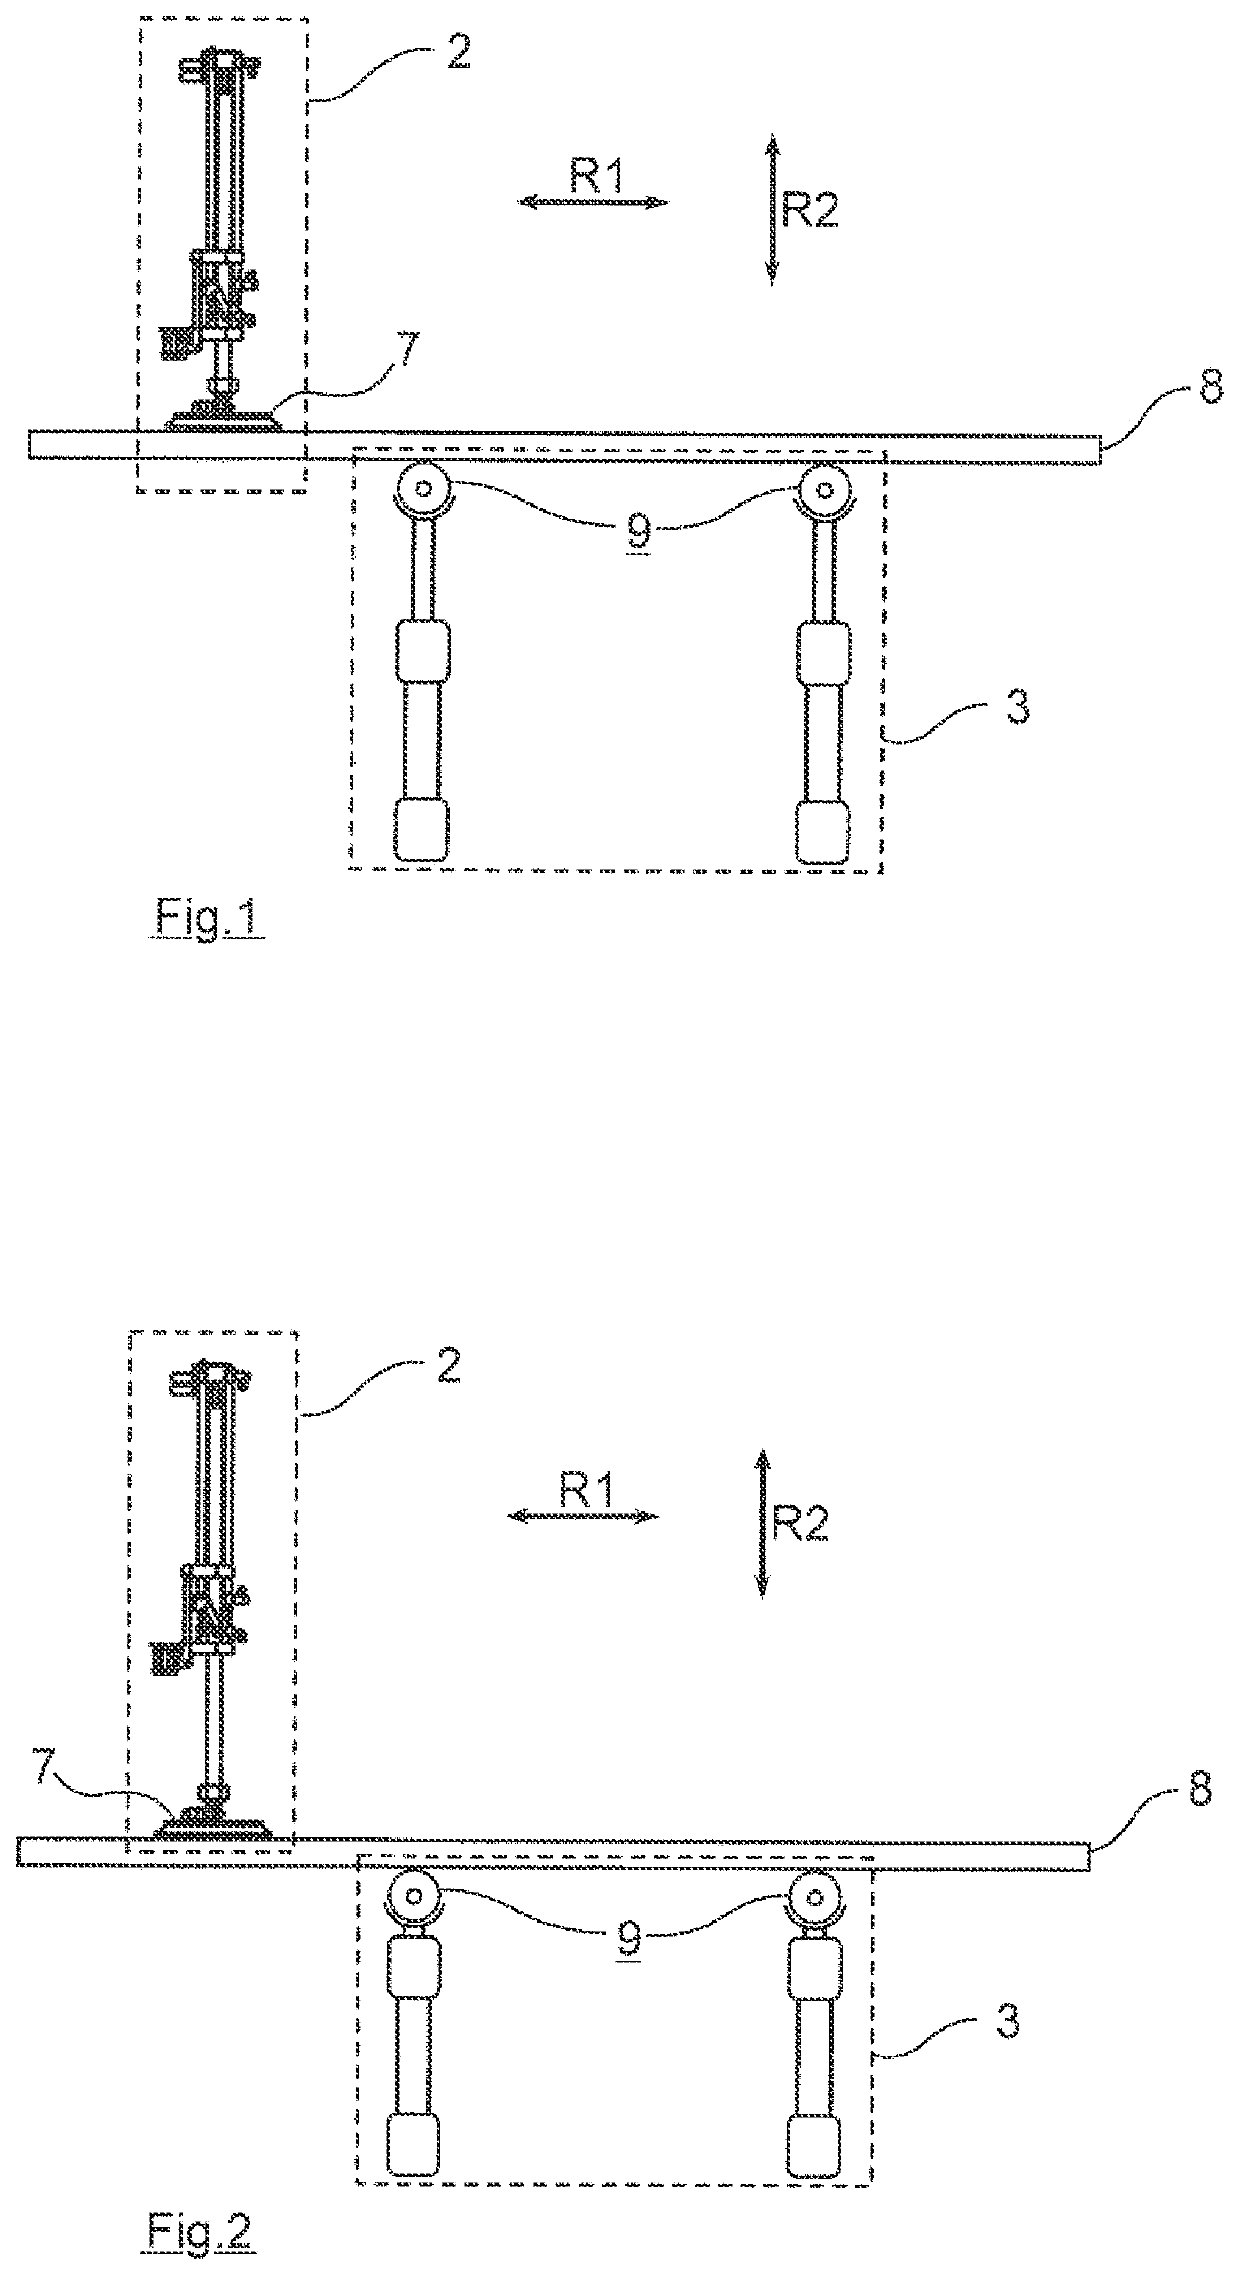 Workpiece handling apparatus and method for batch processing panel-type workpieces